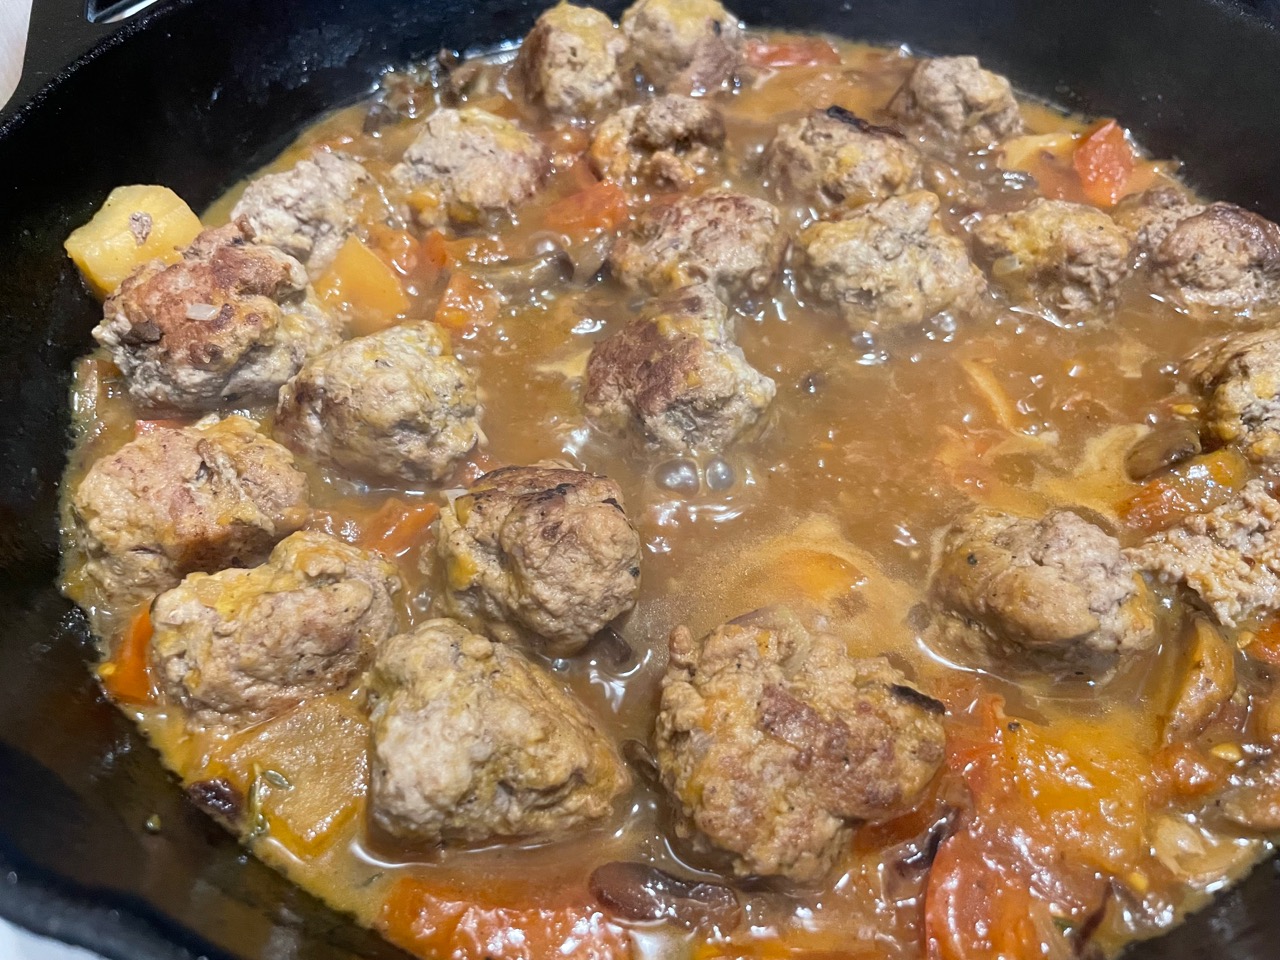 meatballs in the pan cooking in the sauce